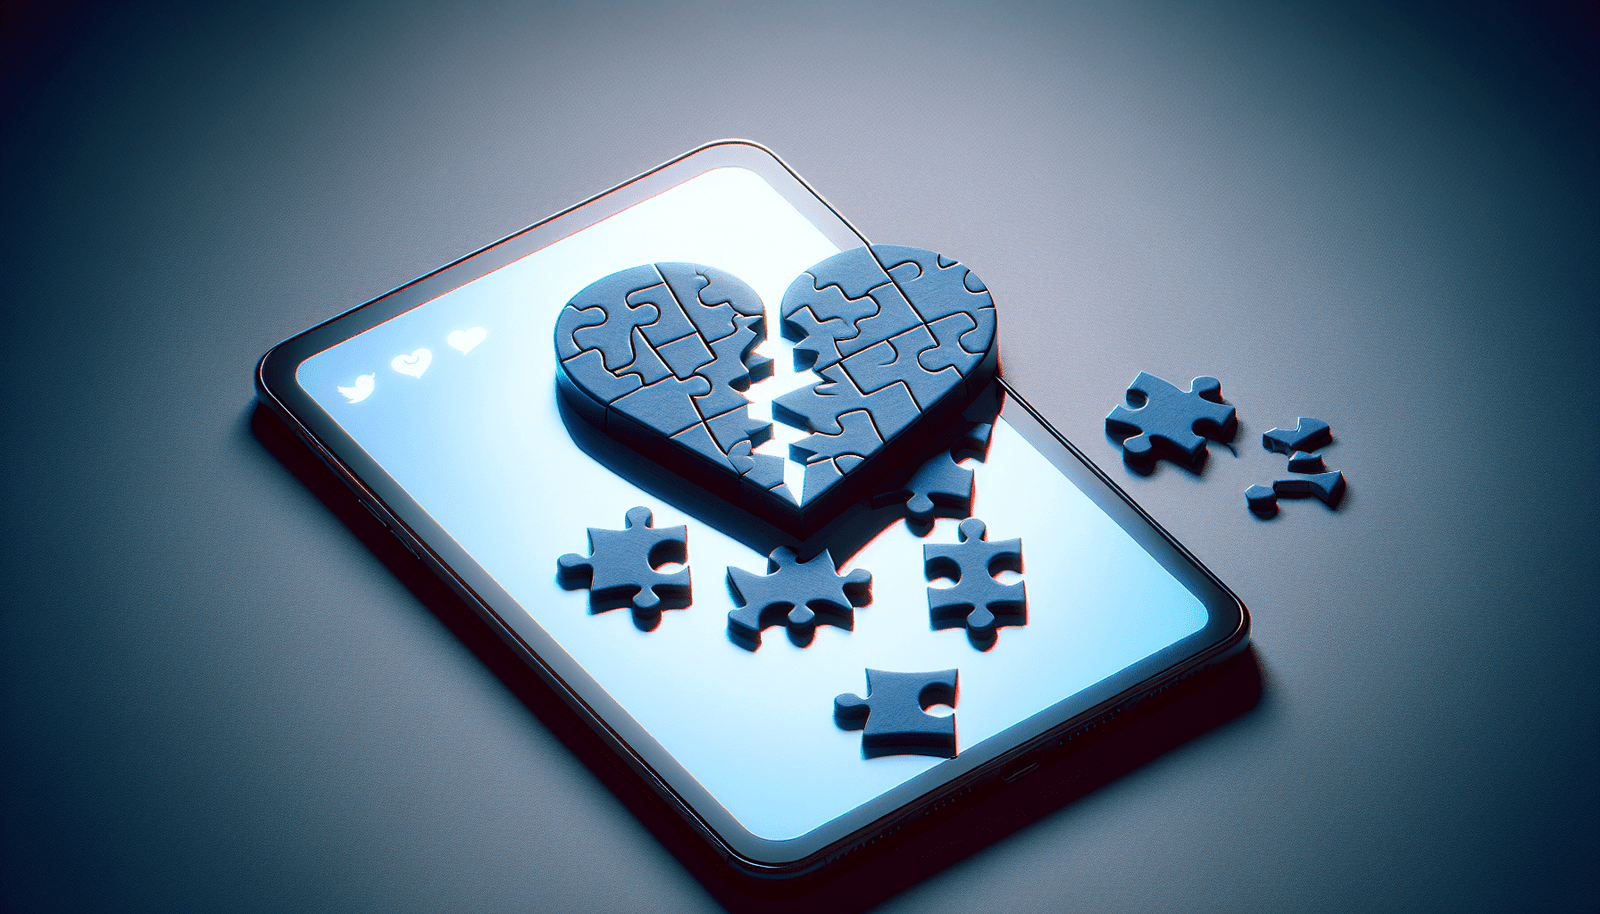 How Do Experiences With Online Dating Shape Our Beliefs About Soulmates?